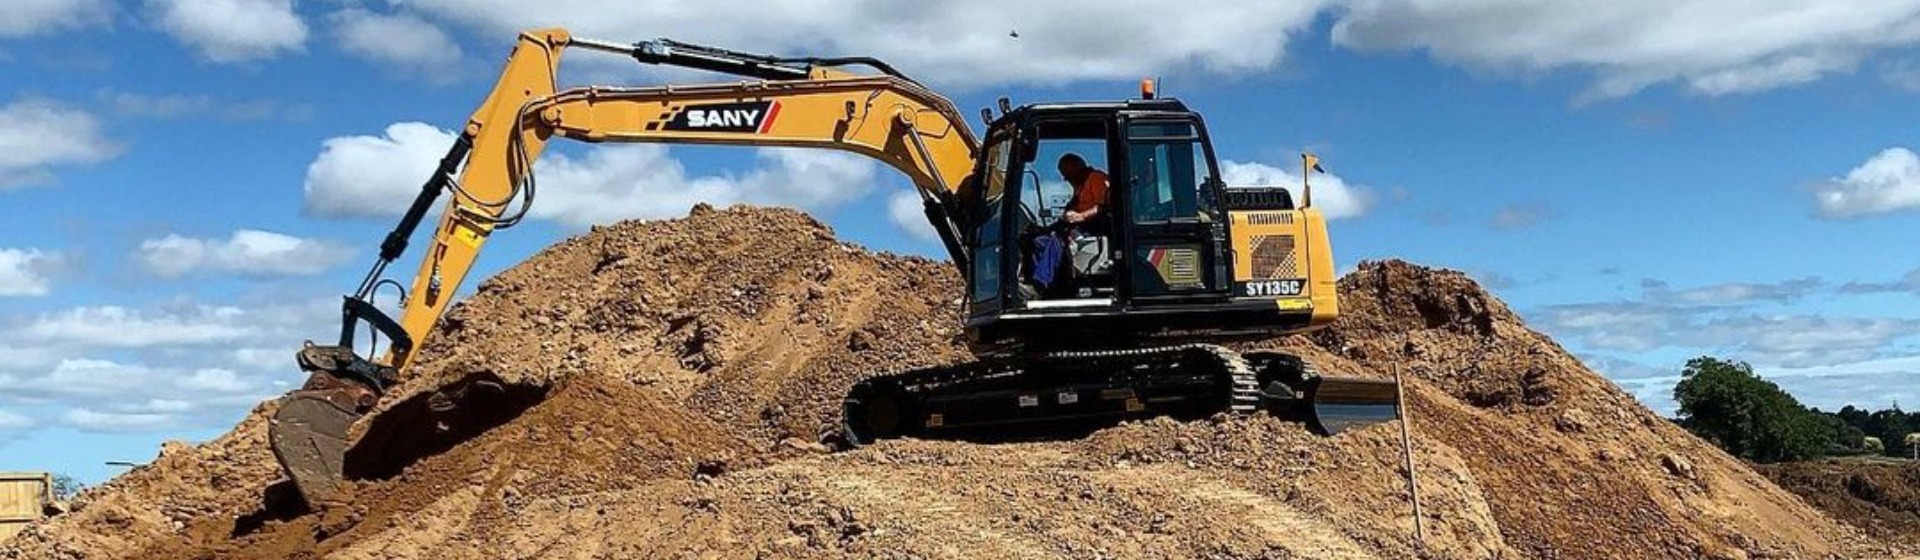 Sales revenue doubles in 50 countries: SANY’s internationalization accelerating